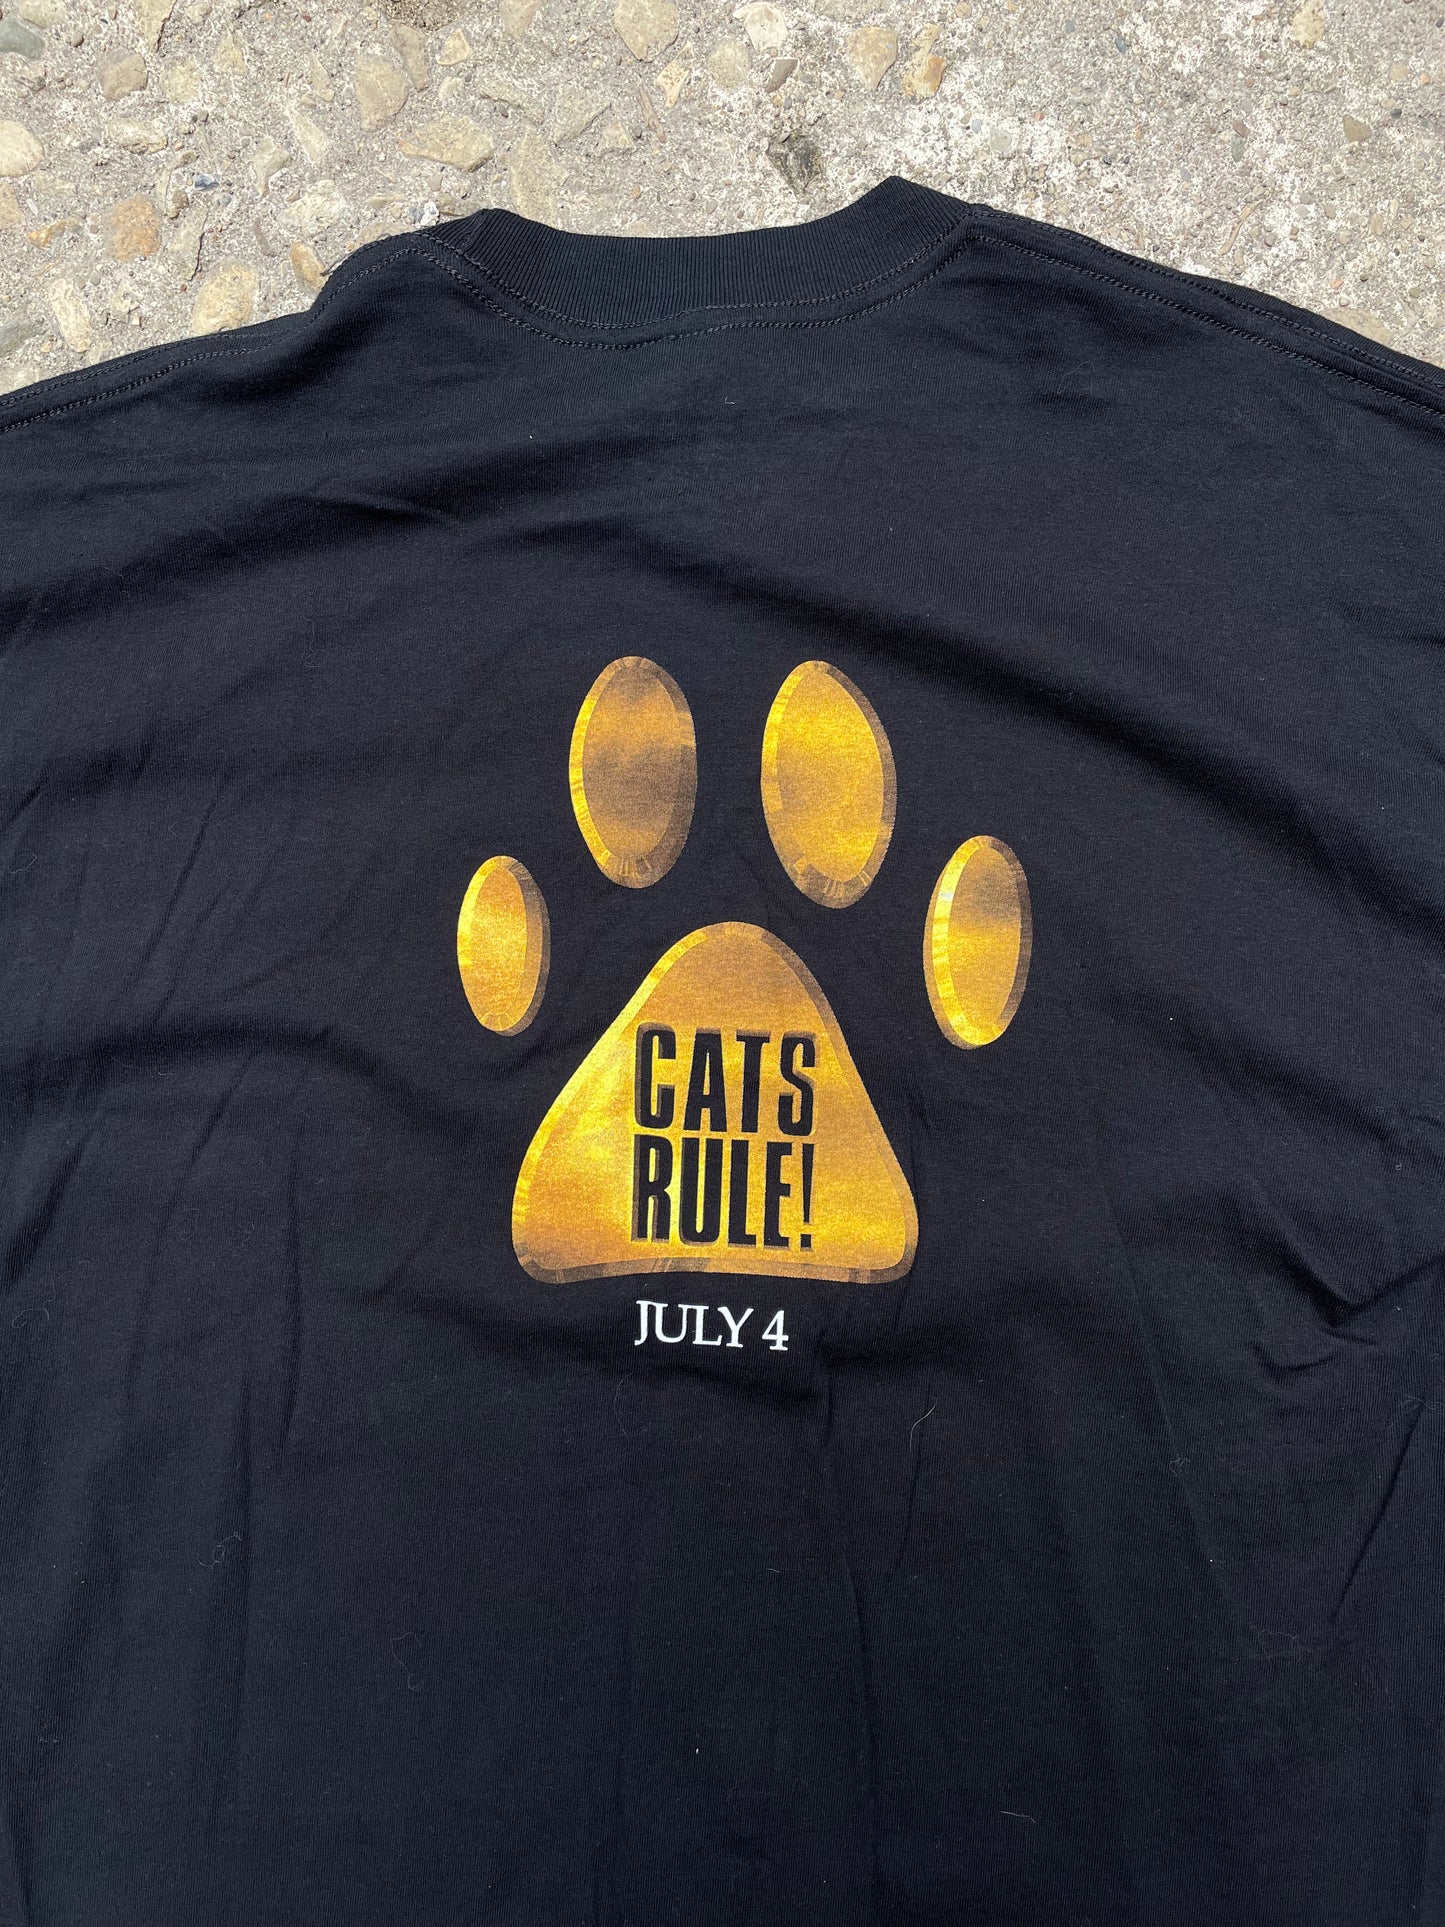 2001 Cats & Dogs Movie Promo T-Shirt - XL